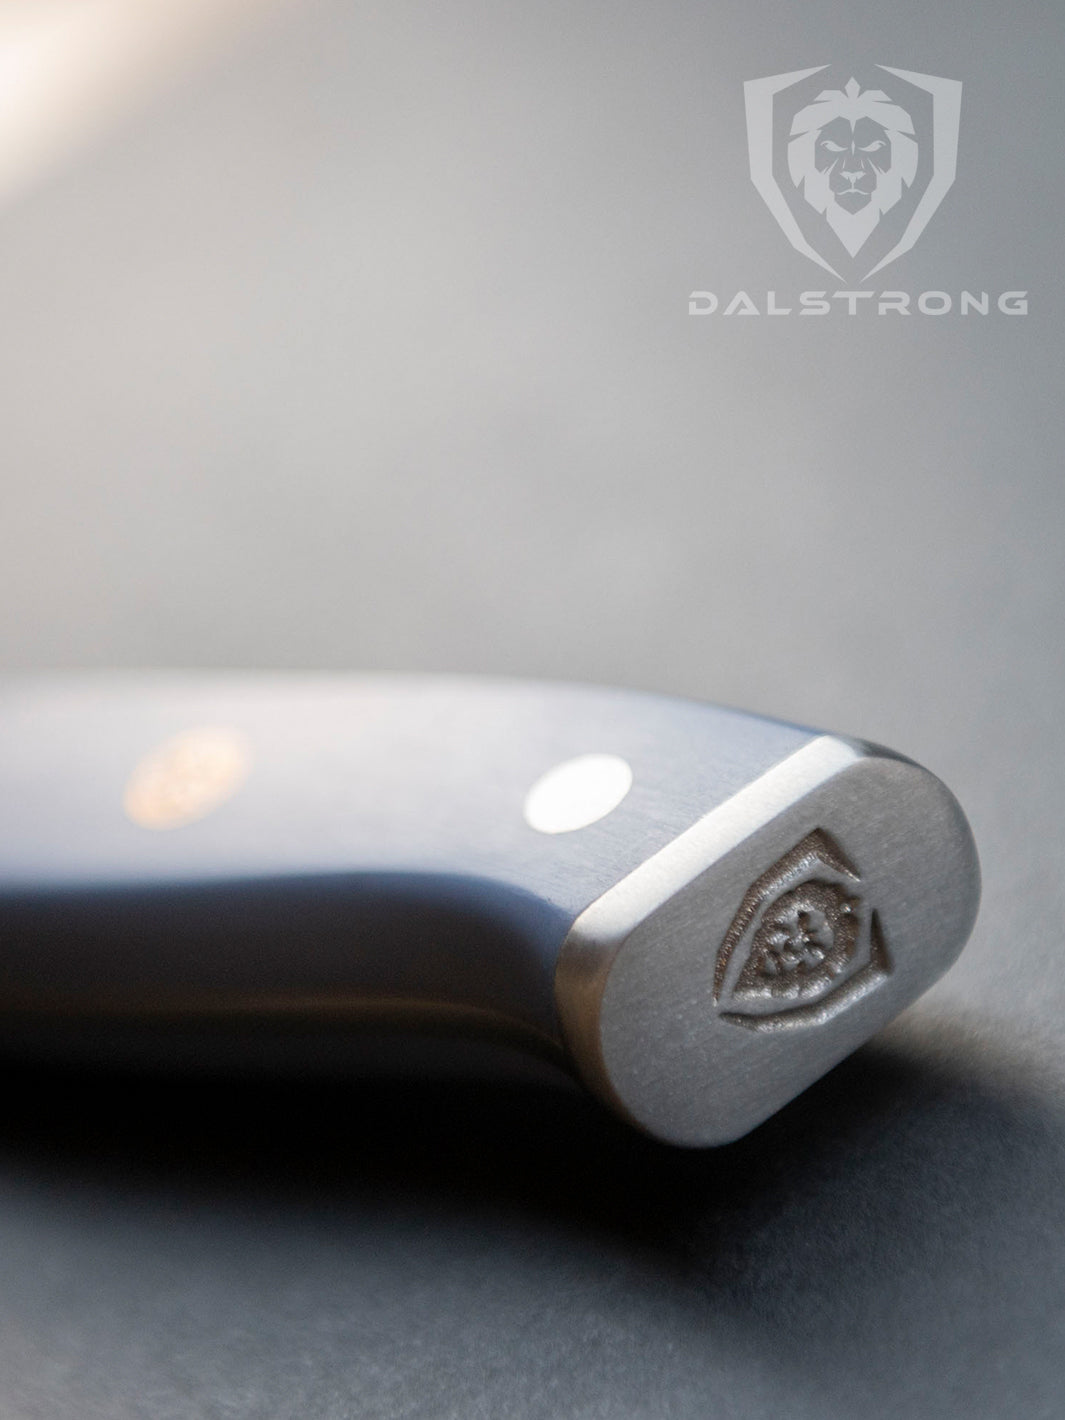 Dalstrong shogun series 8 inch chef knife with light blue matte handle featuring the dalstrong logo engraved at the bottom.